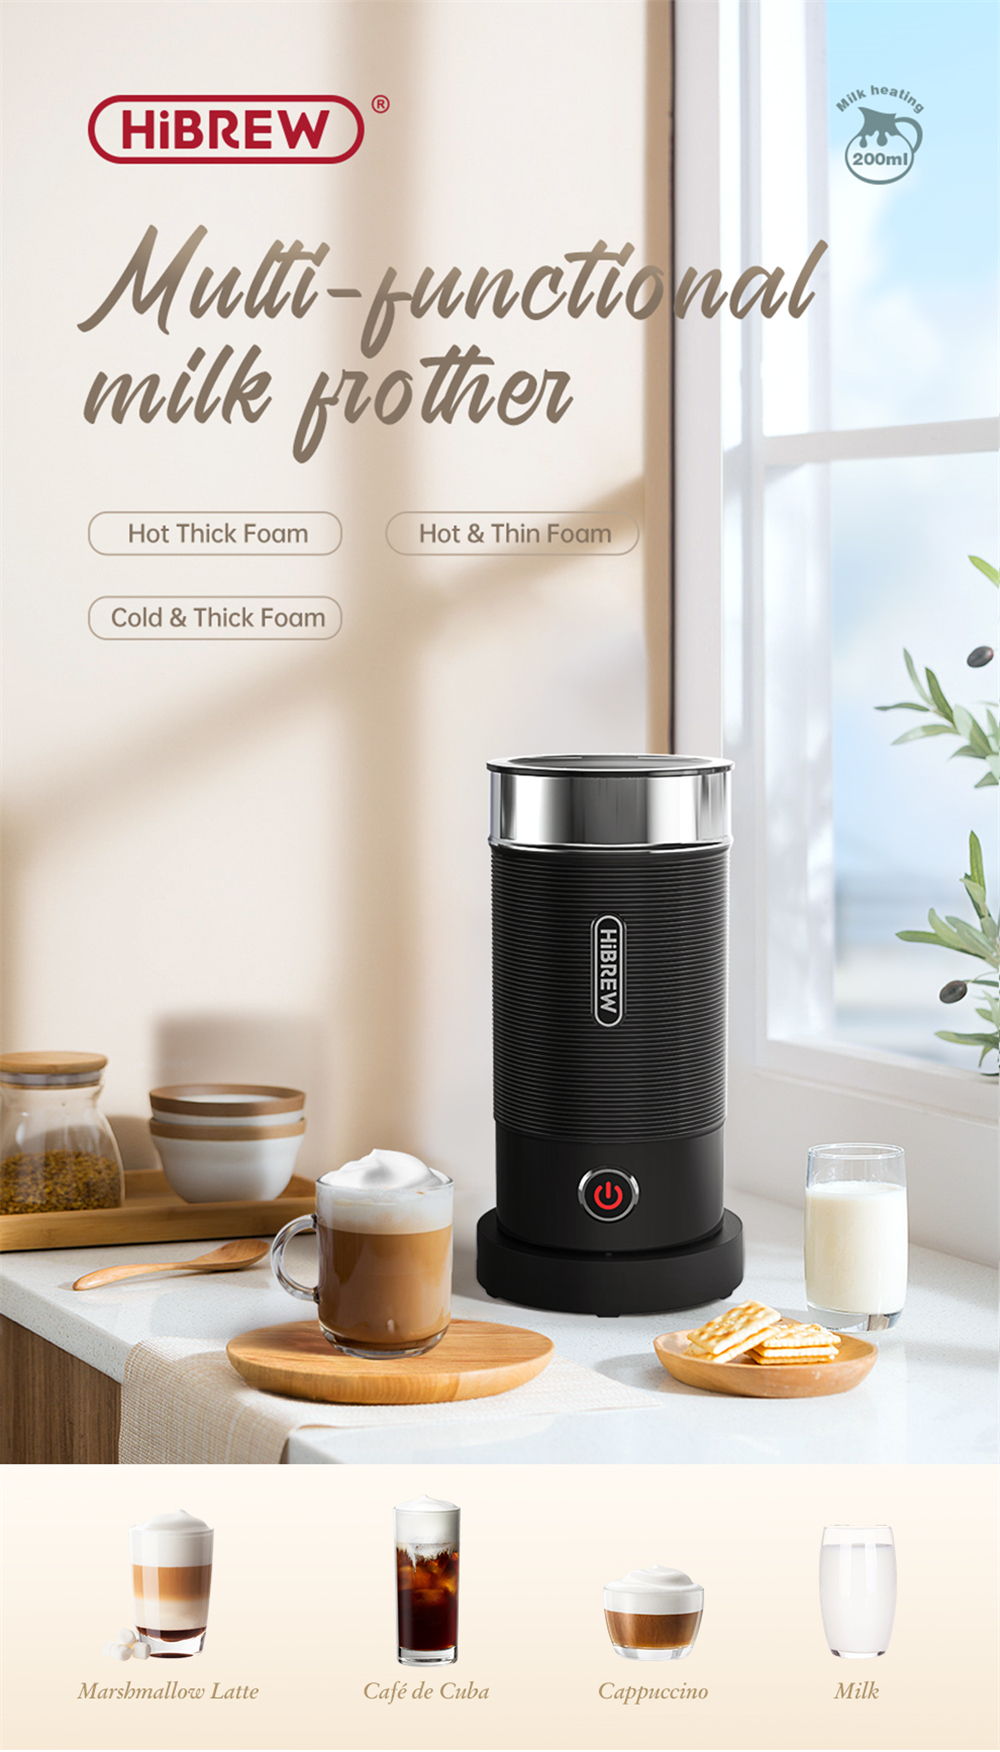 HiBREW-M1A-Milk-Frother-Frothing-Foamer-Chocolate-Mixer-ColdHot-Latte-Cappuccino-fully-automatic-Mil-1911176-1